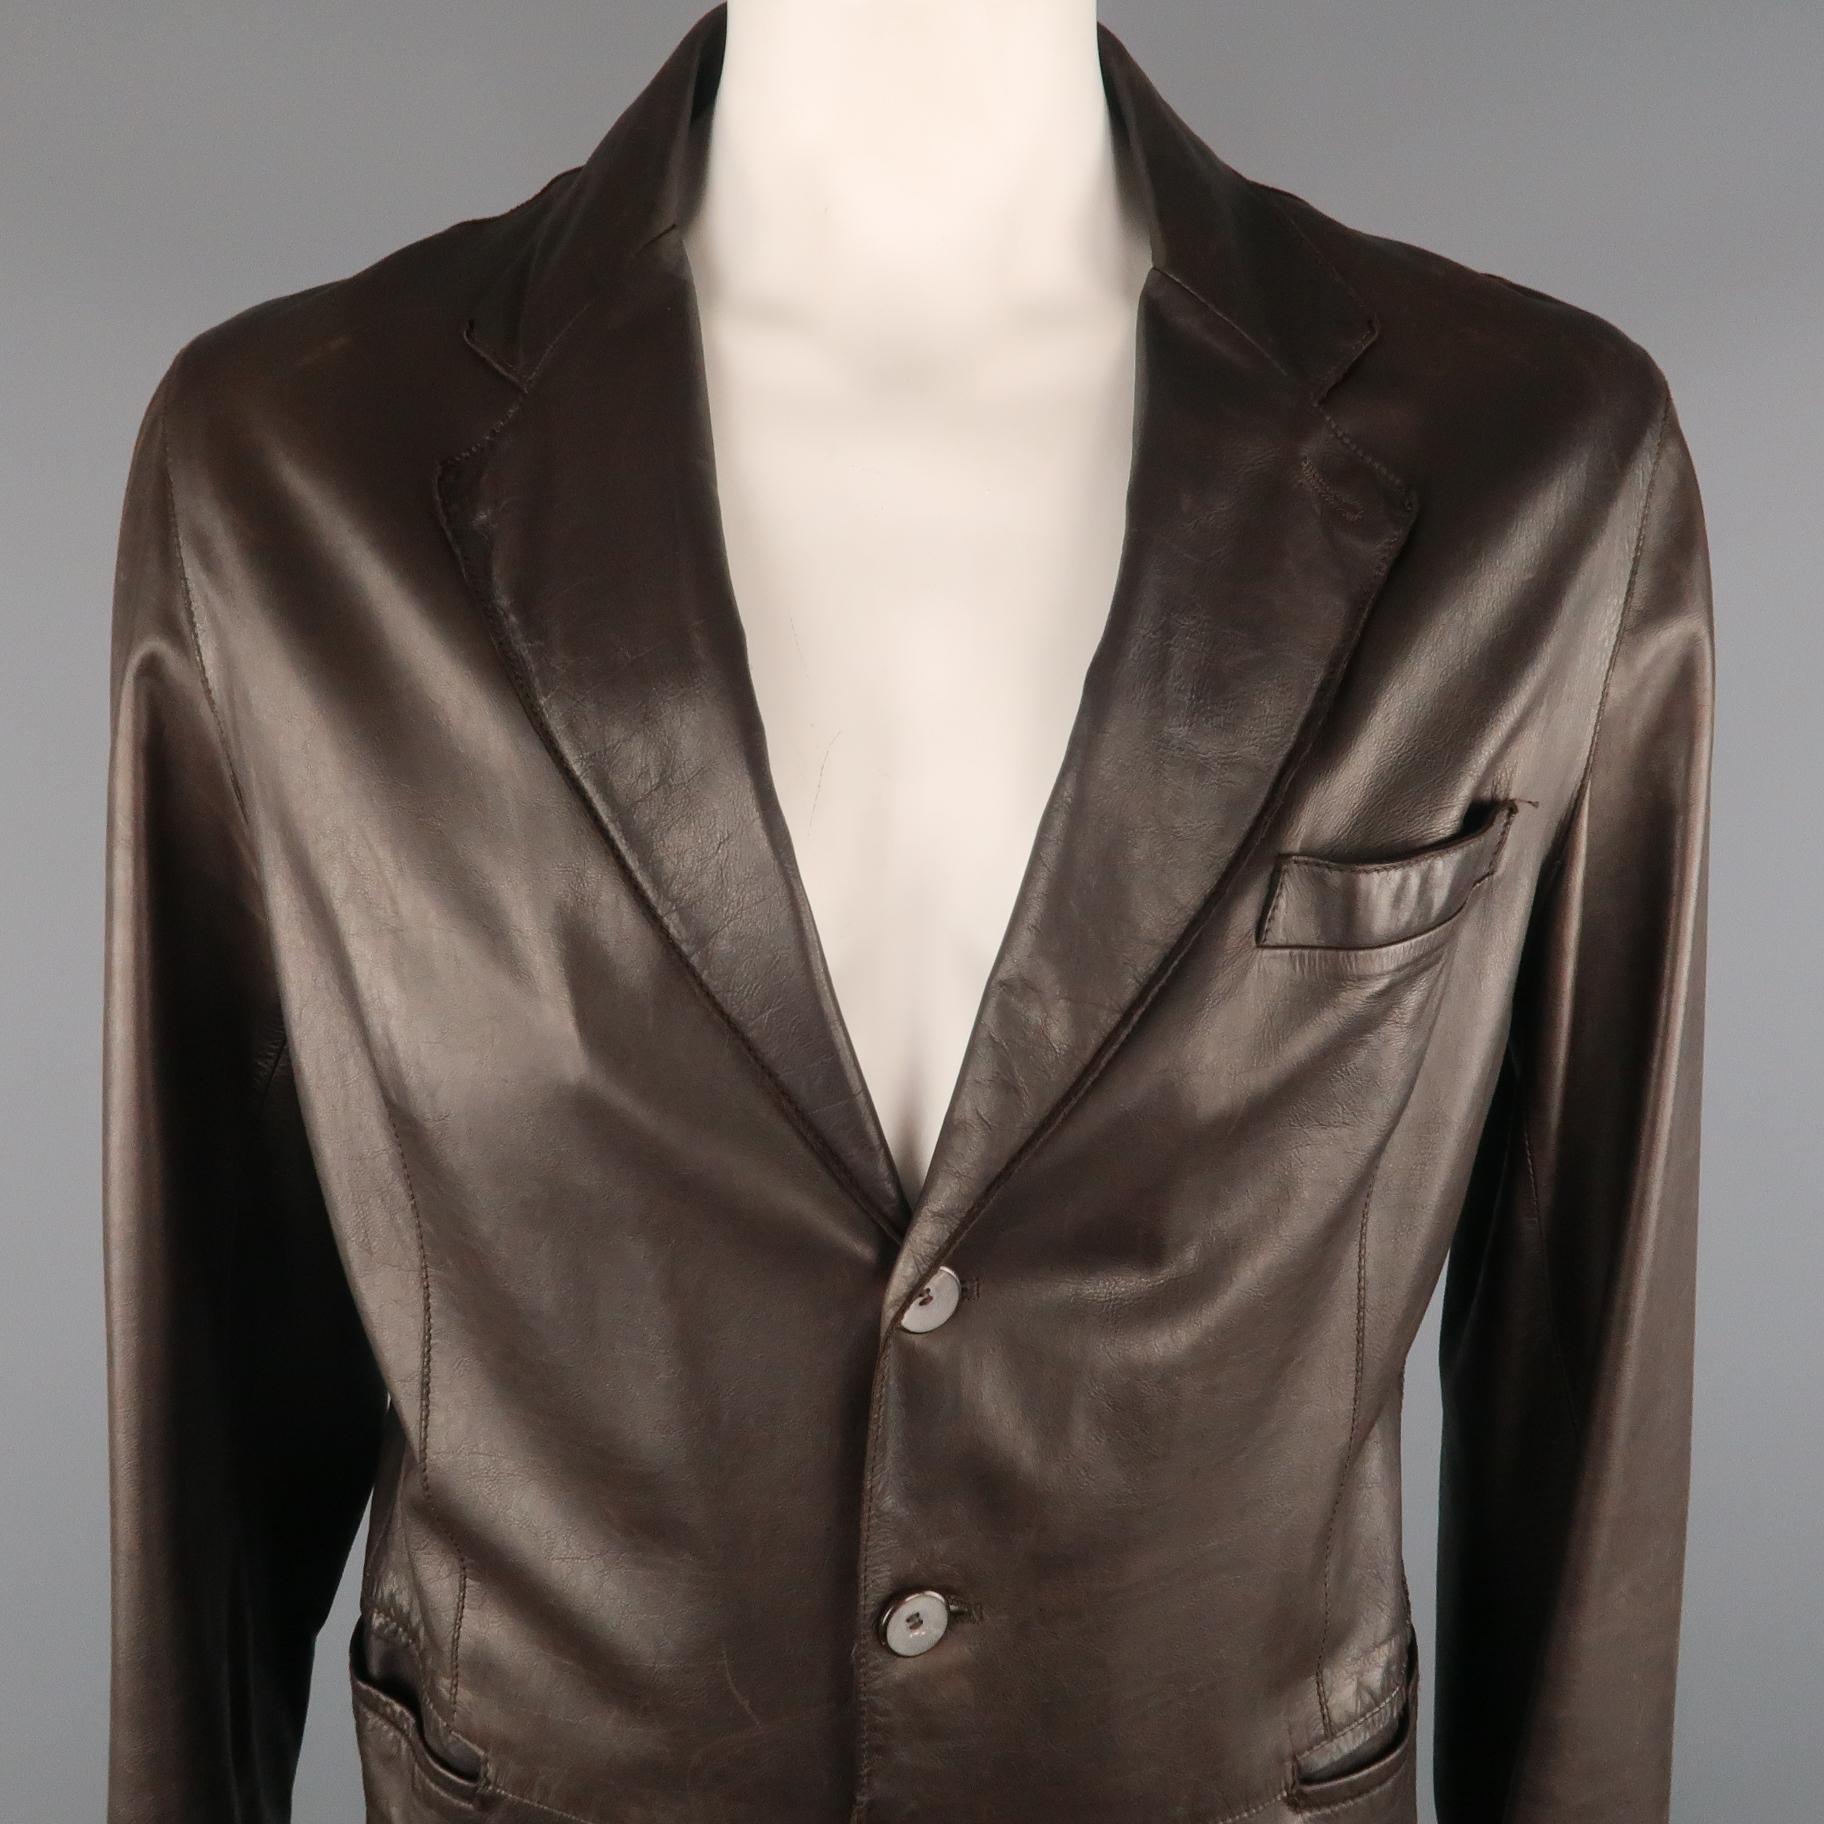 GIORGIO ARMANI Sport Coat comes in a brown tone in a solid leather material, with a notch lapel, slit pockets, 3 buttons at closure, single breasted, functional buttons at cuffs and a single vent at back. As Is. Made in Italy.
 
Good Pre-Owned